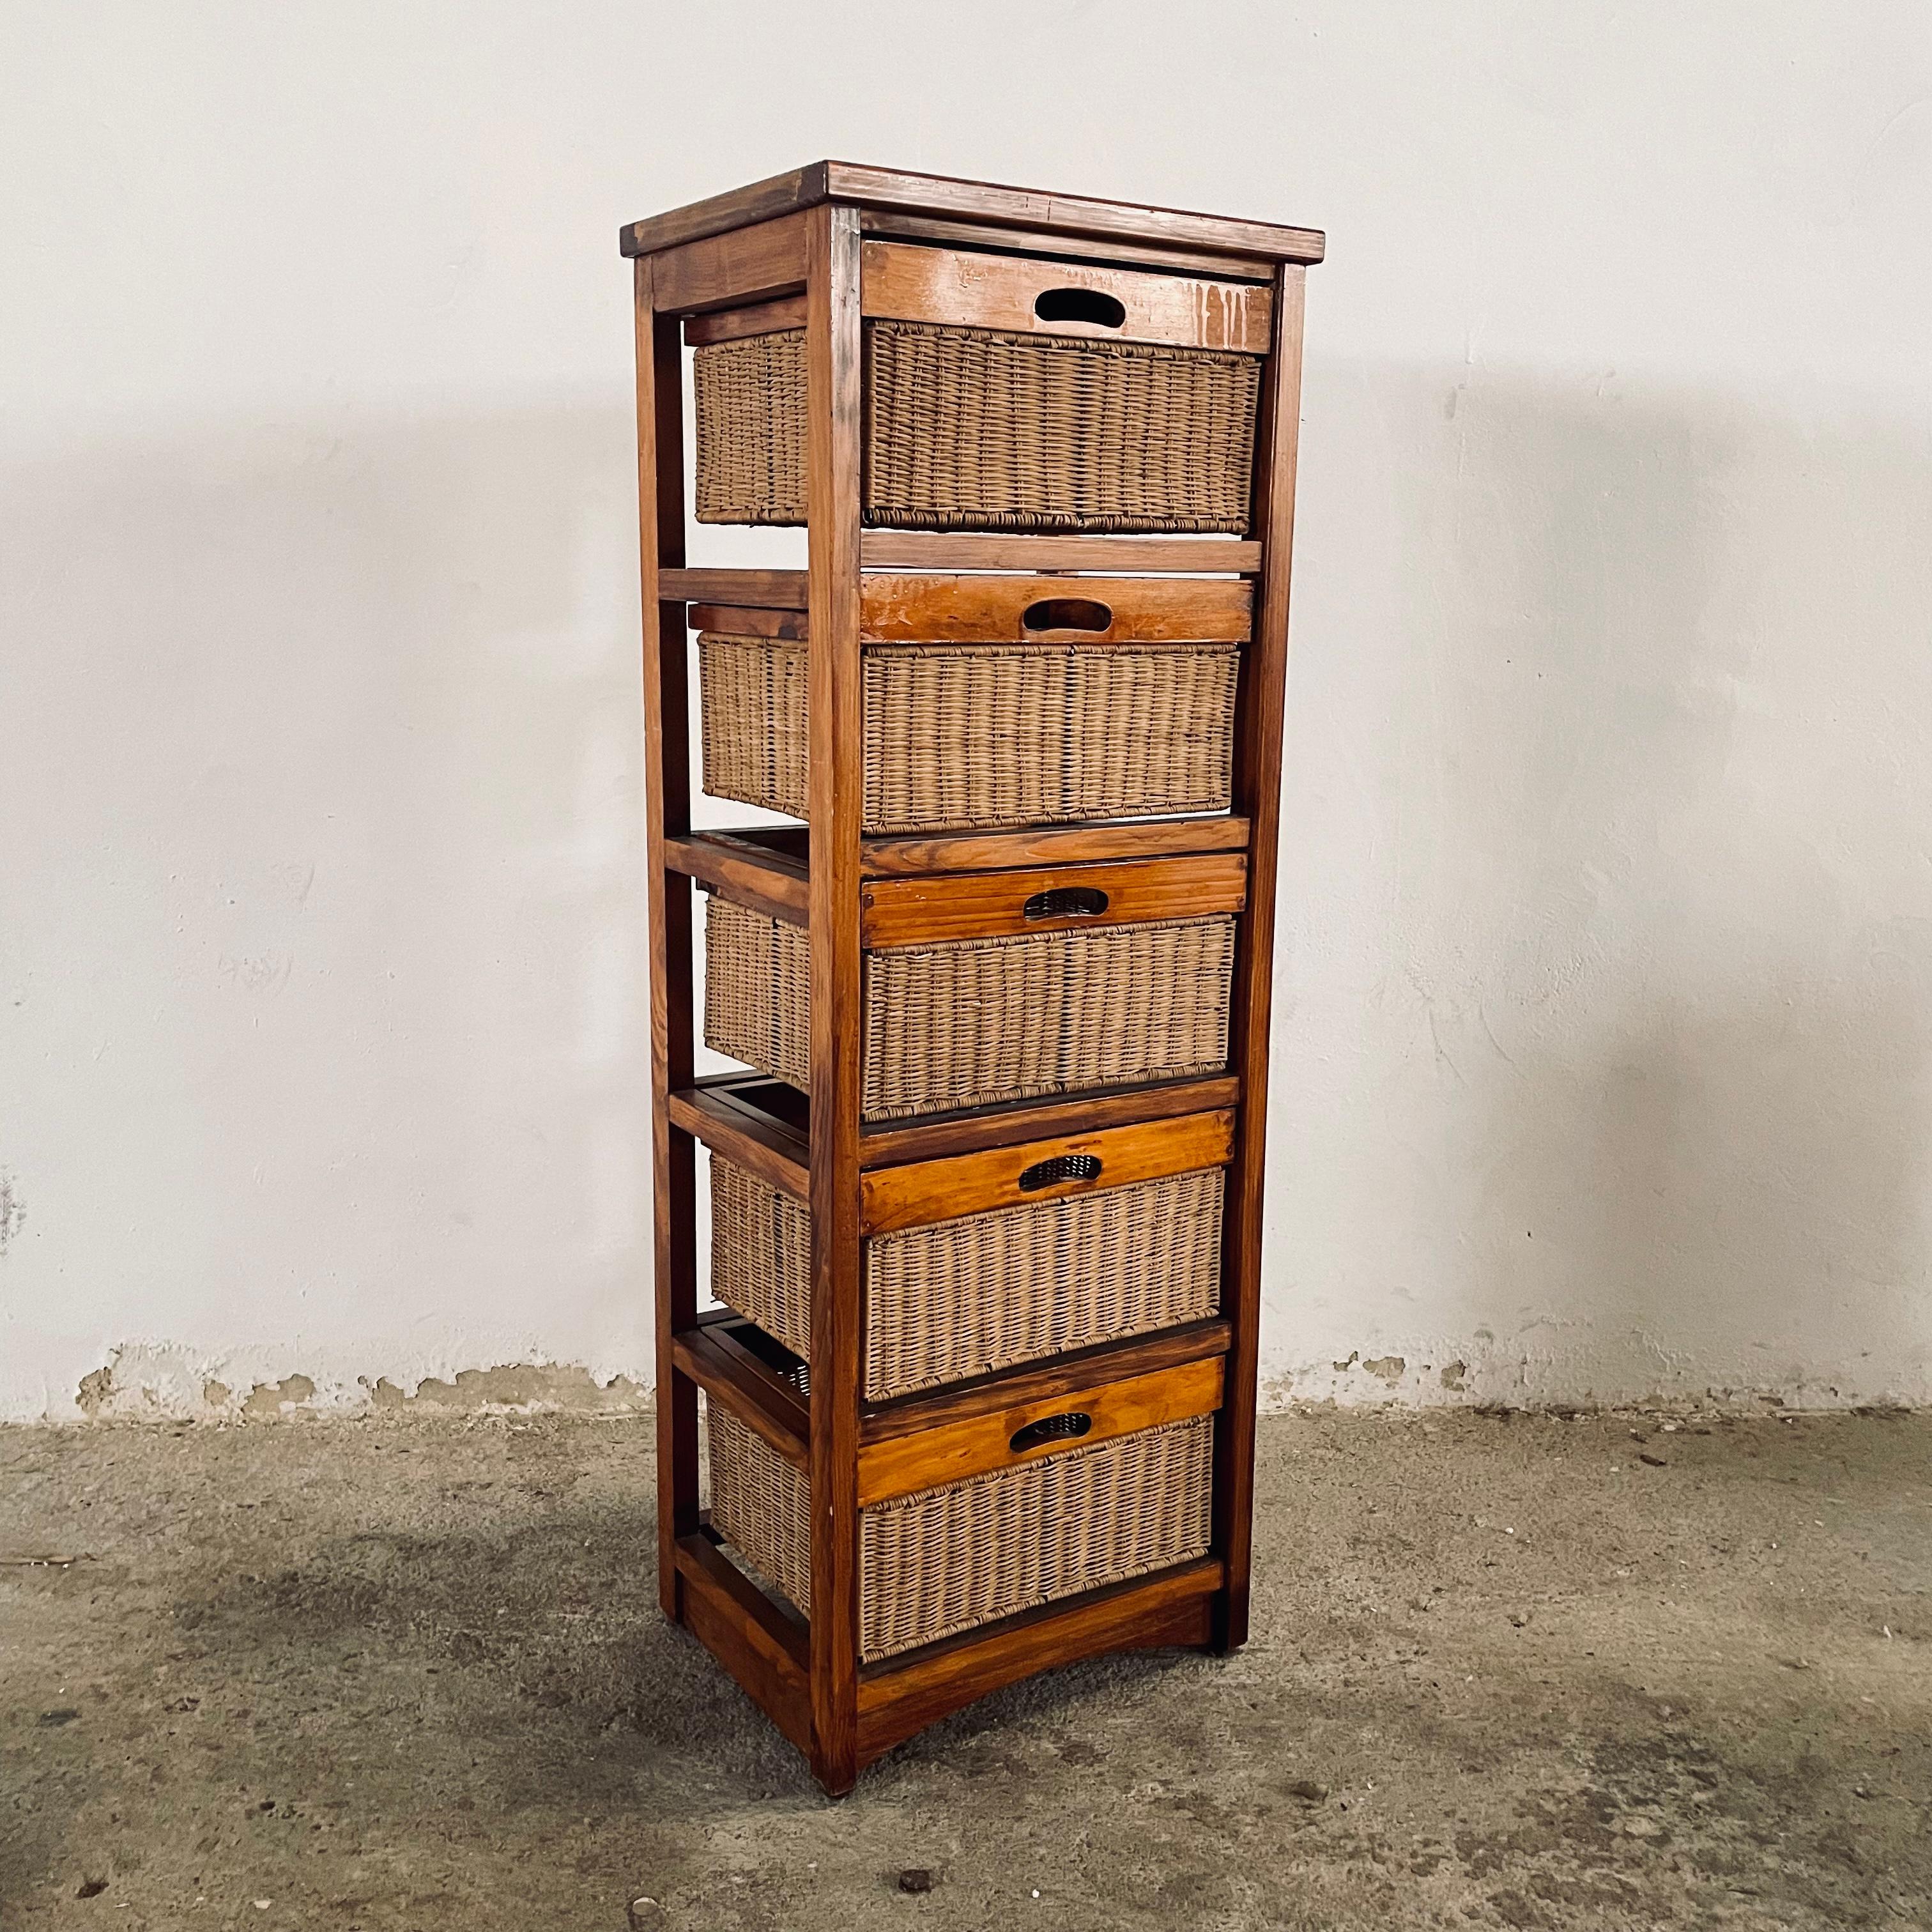 Vintage Bamboo and Rattan Chest of 5-Drawers in the style of Pencil Reed originally from Spain circa 1970s
This vintage item remains fully functional, it shows minor sign of age through scuffs, dings, faded finishes, minor surface defects, minimal